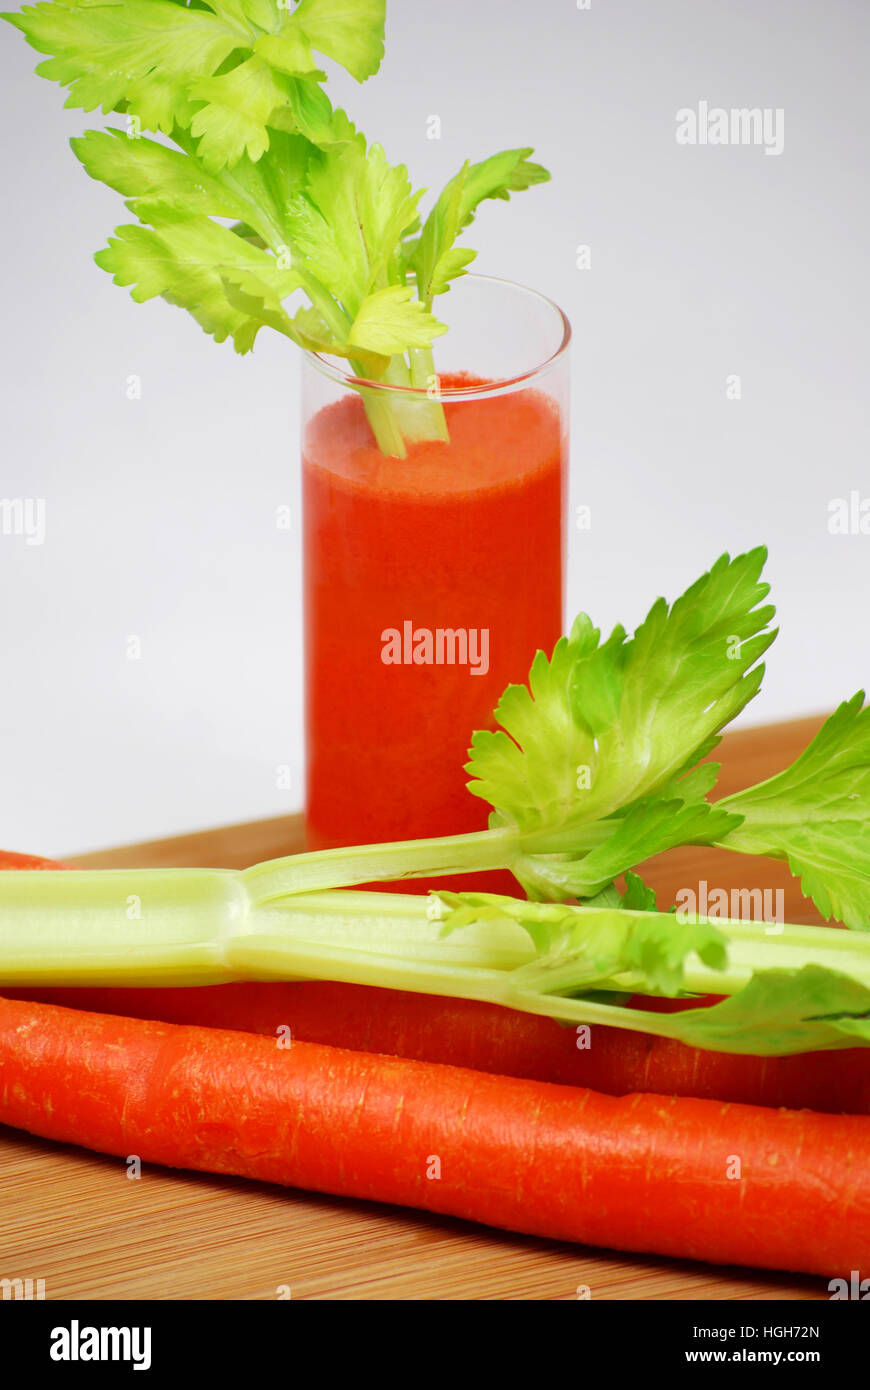 Fresh Raw Carrot Juice with Celery Stick. Health drink. Stock Photo